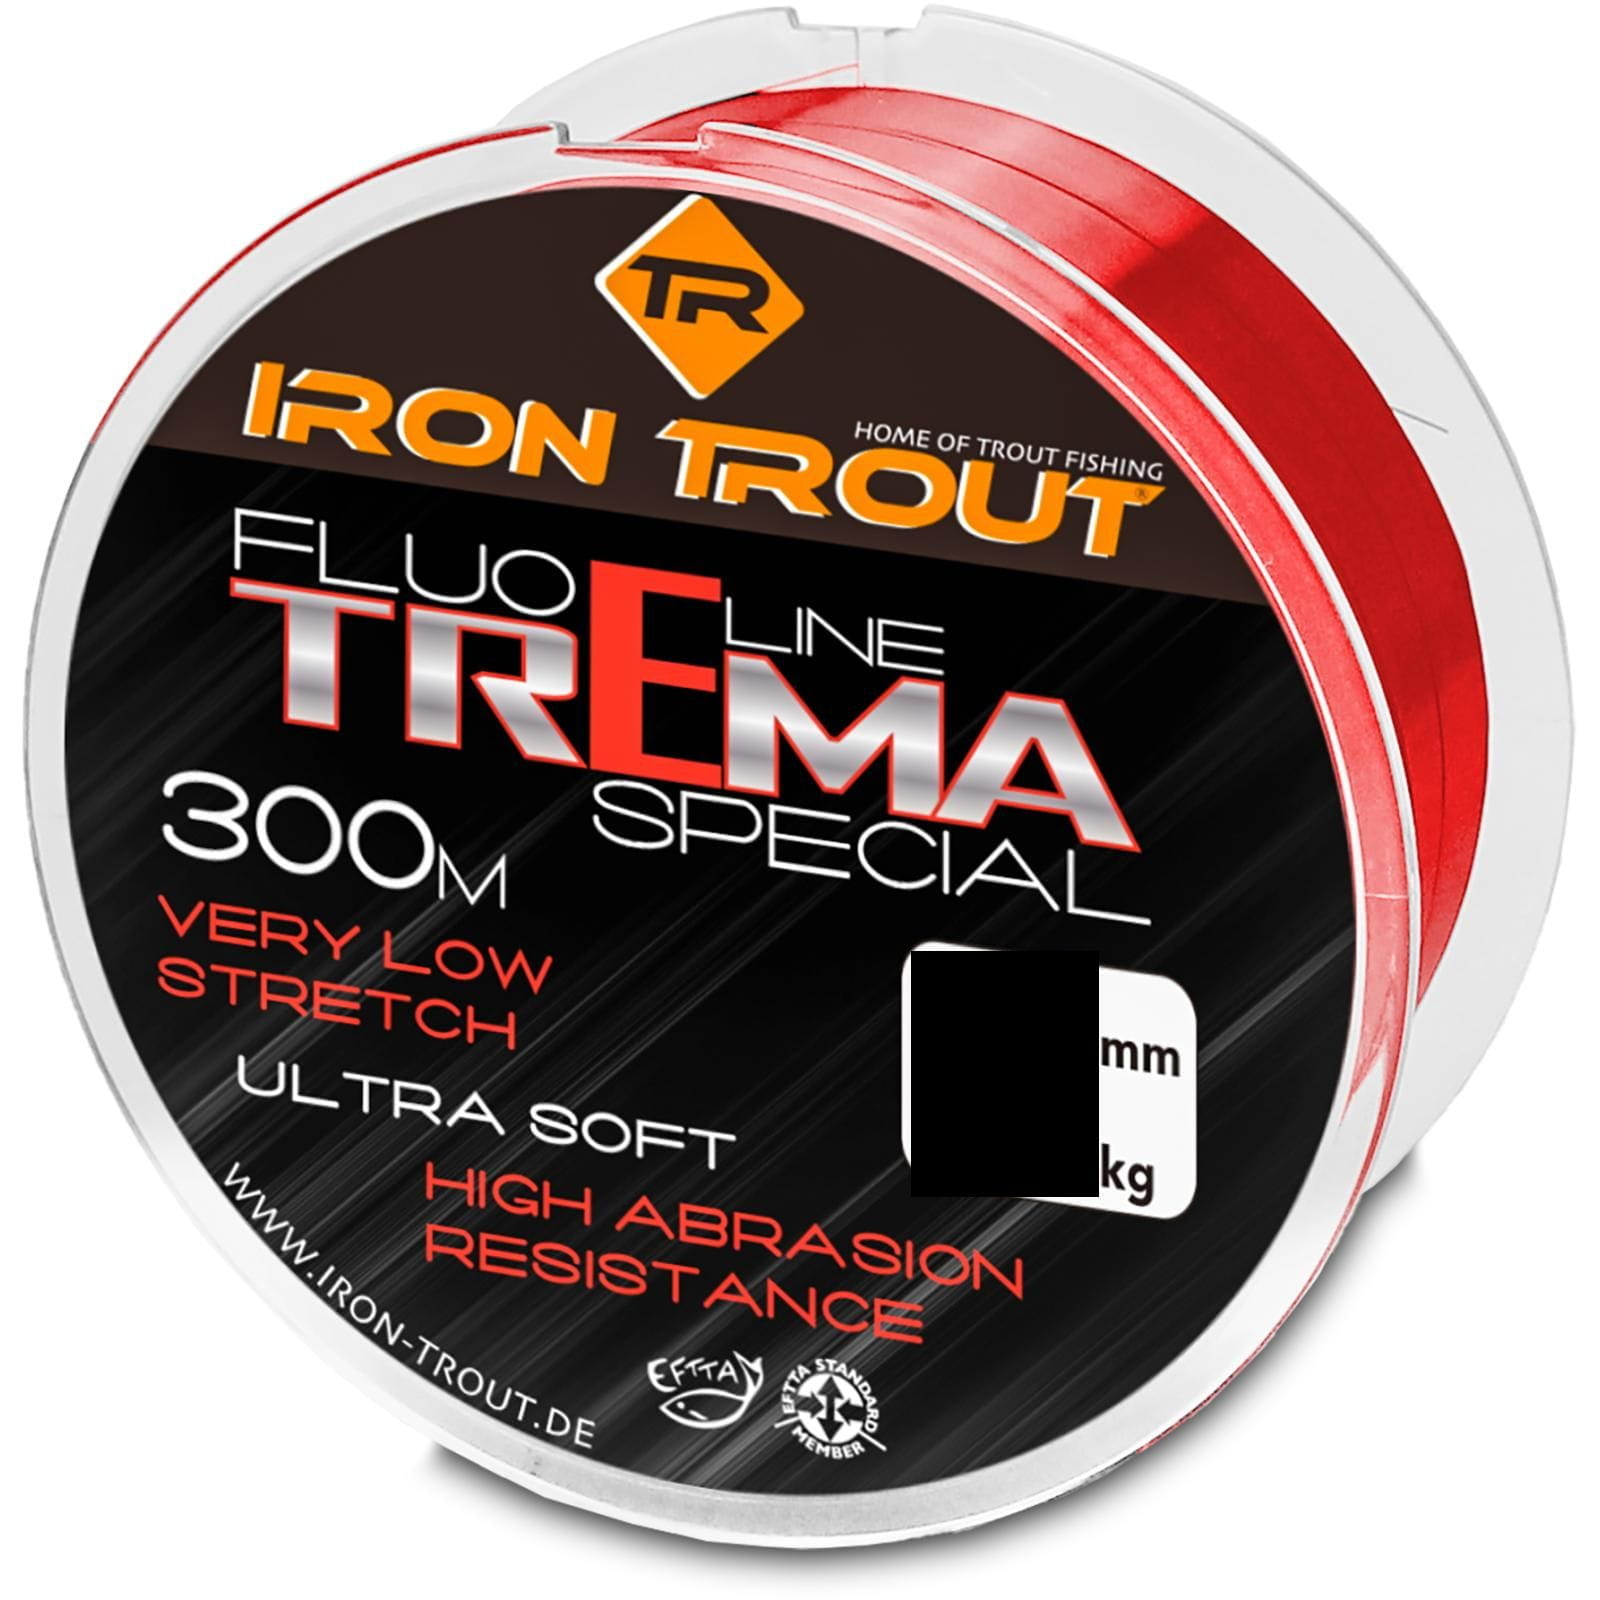 Iron Trout Trema Special 0,20 mm 3,20 kg 300 Meter Fluo Rood